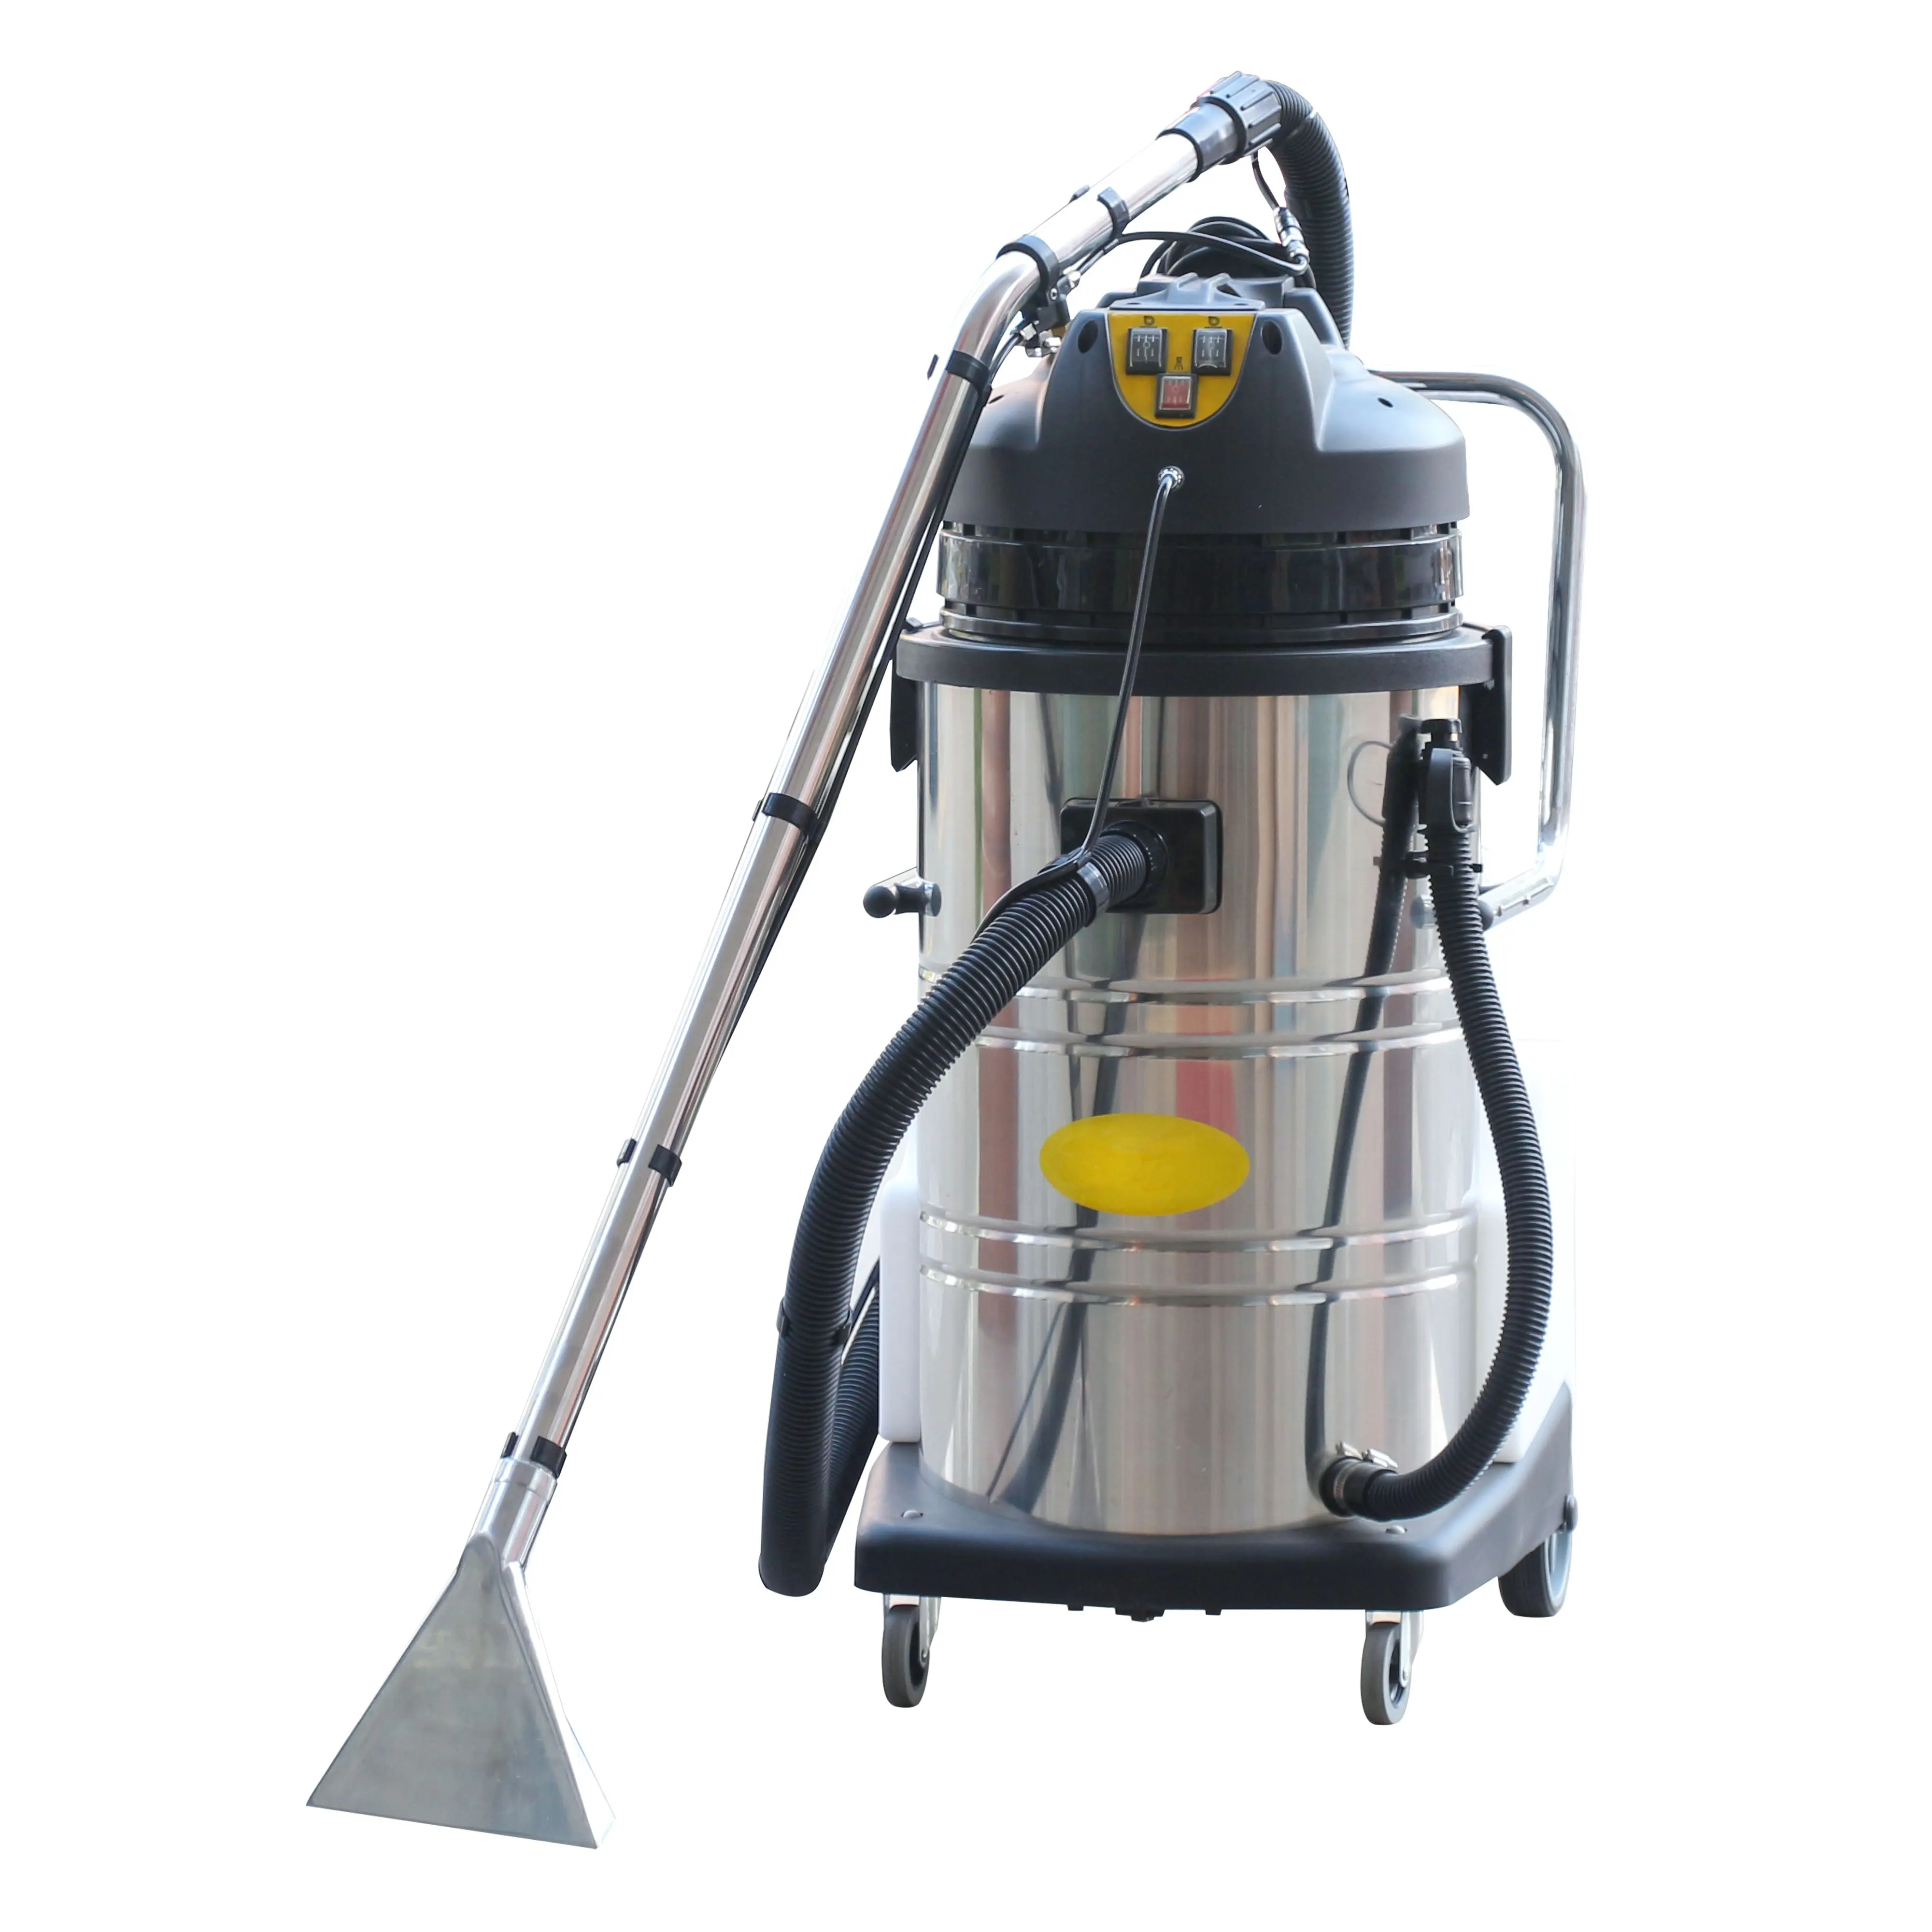 New Product Truck Mount Carpet Cleaning Machine For Sale